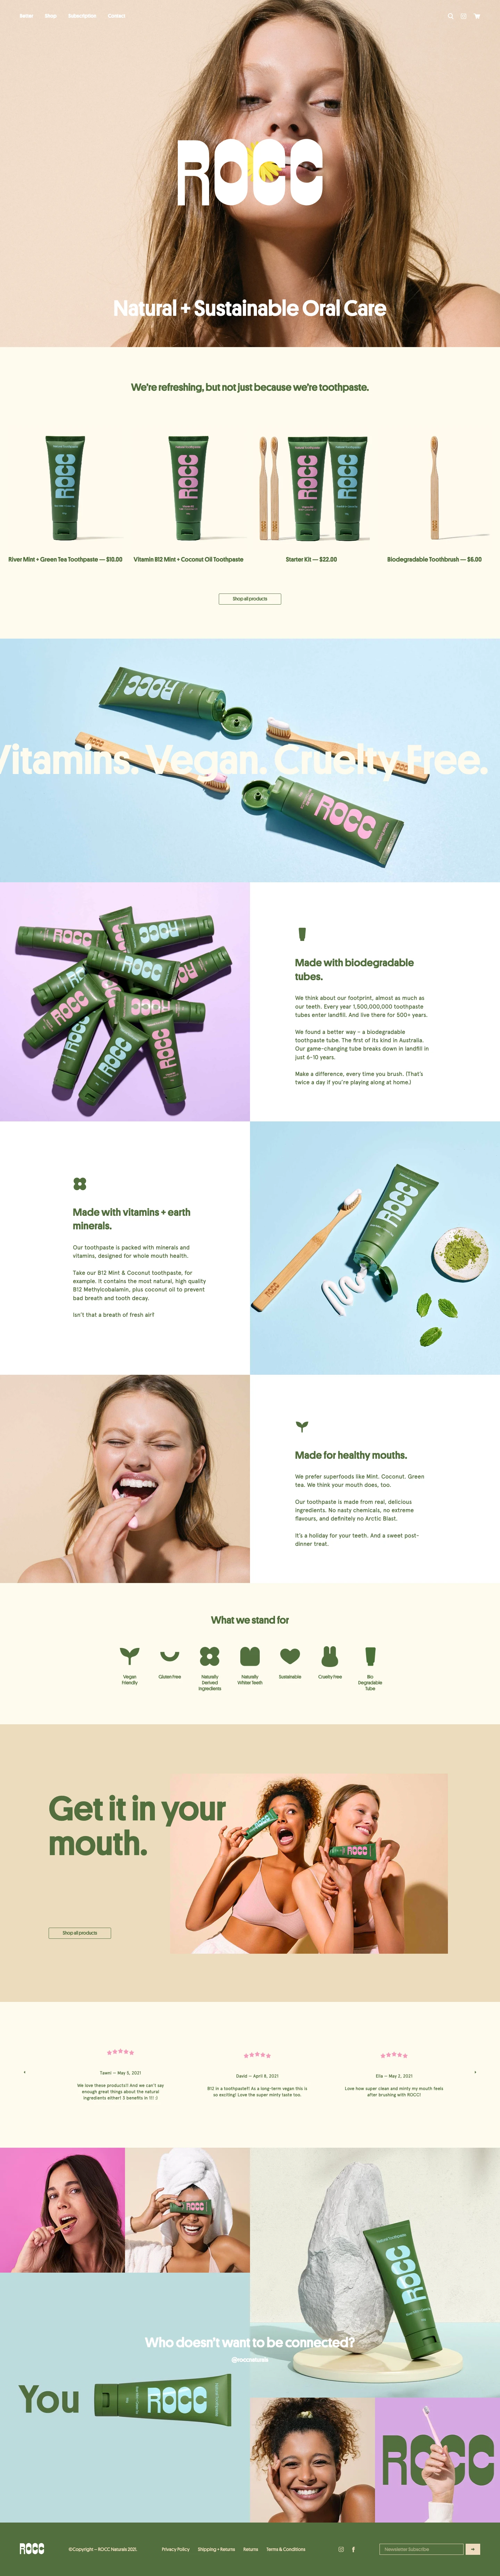 Rocc Naturals Landing Page Example: Natural + Sustainable Oral Care.